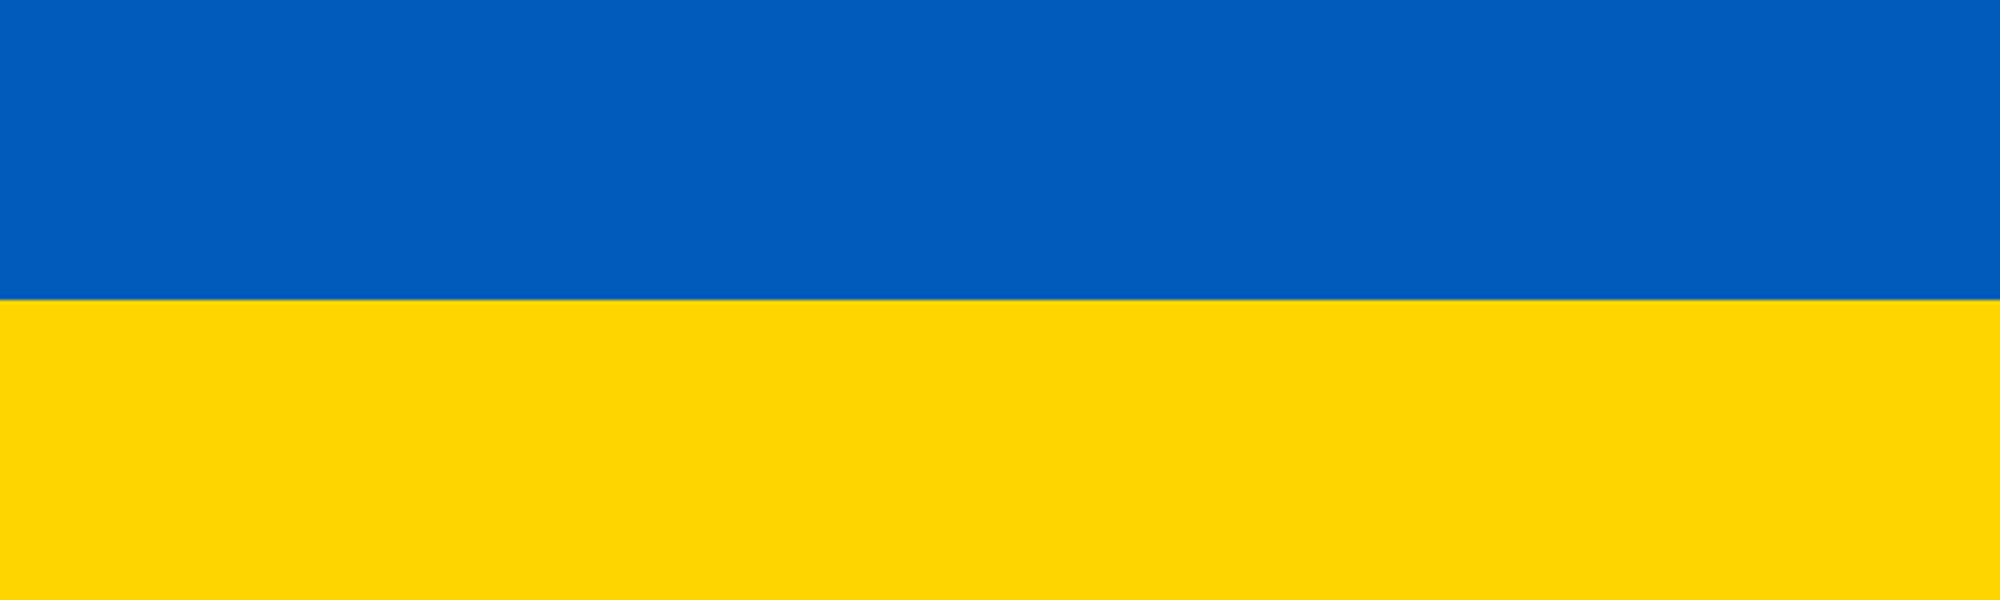 Background image: We're fully supportive of the UK government's Homes for Ukraine scheme and we want to help make it as simple as possible for homeowners to take part